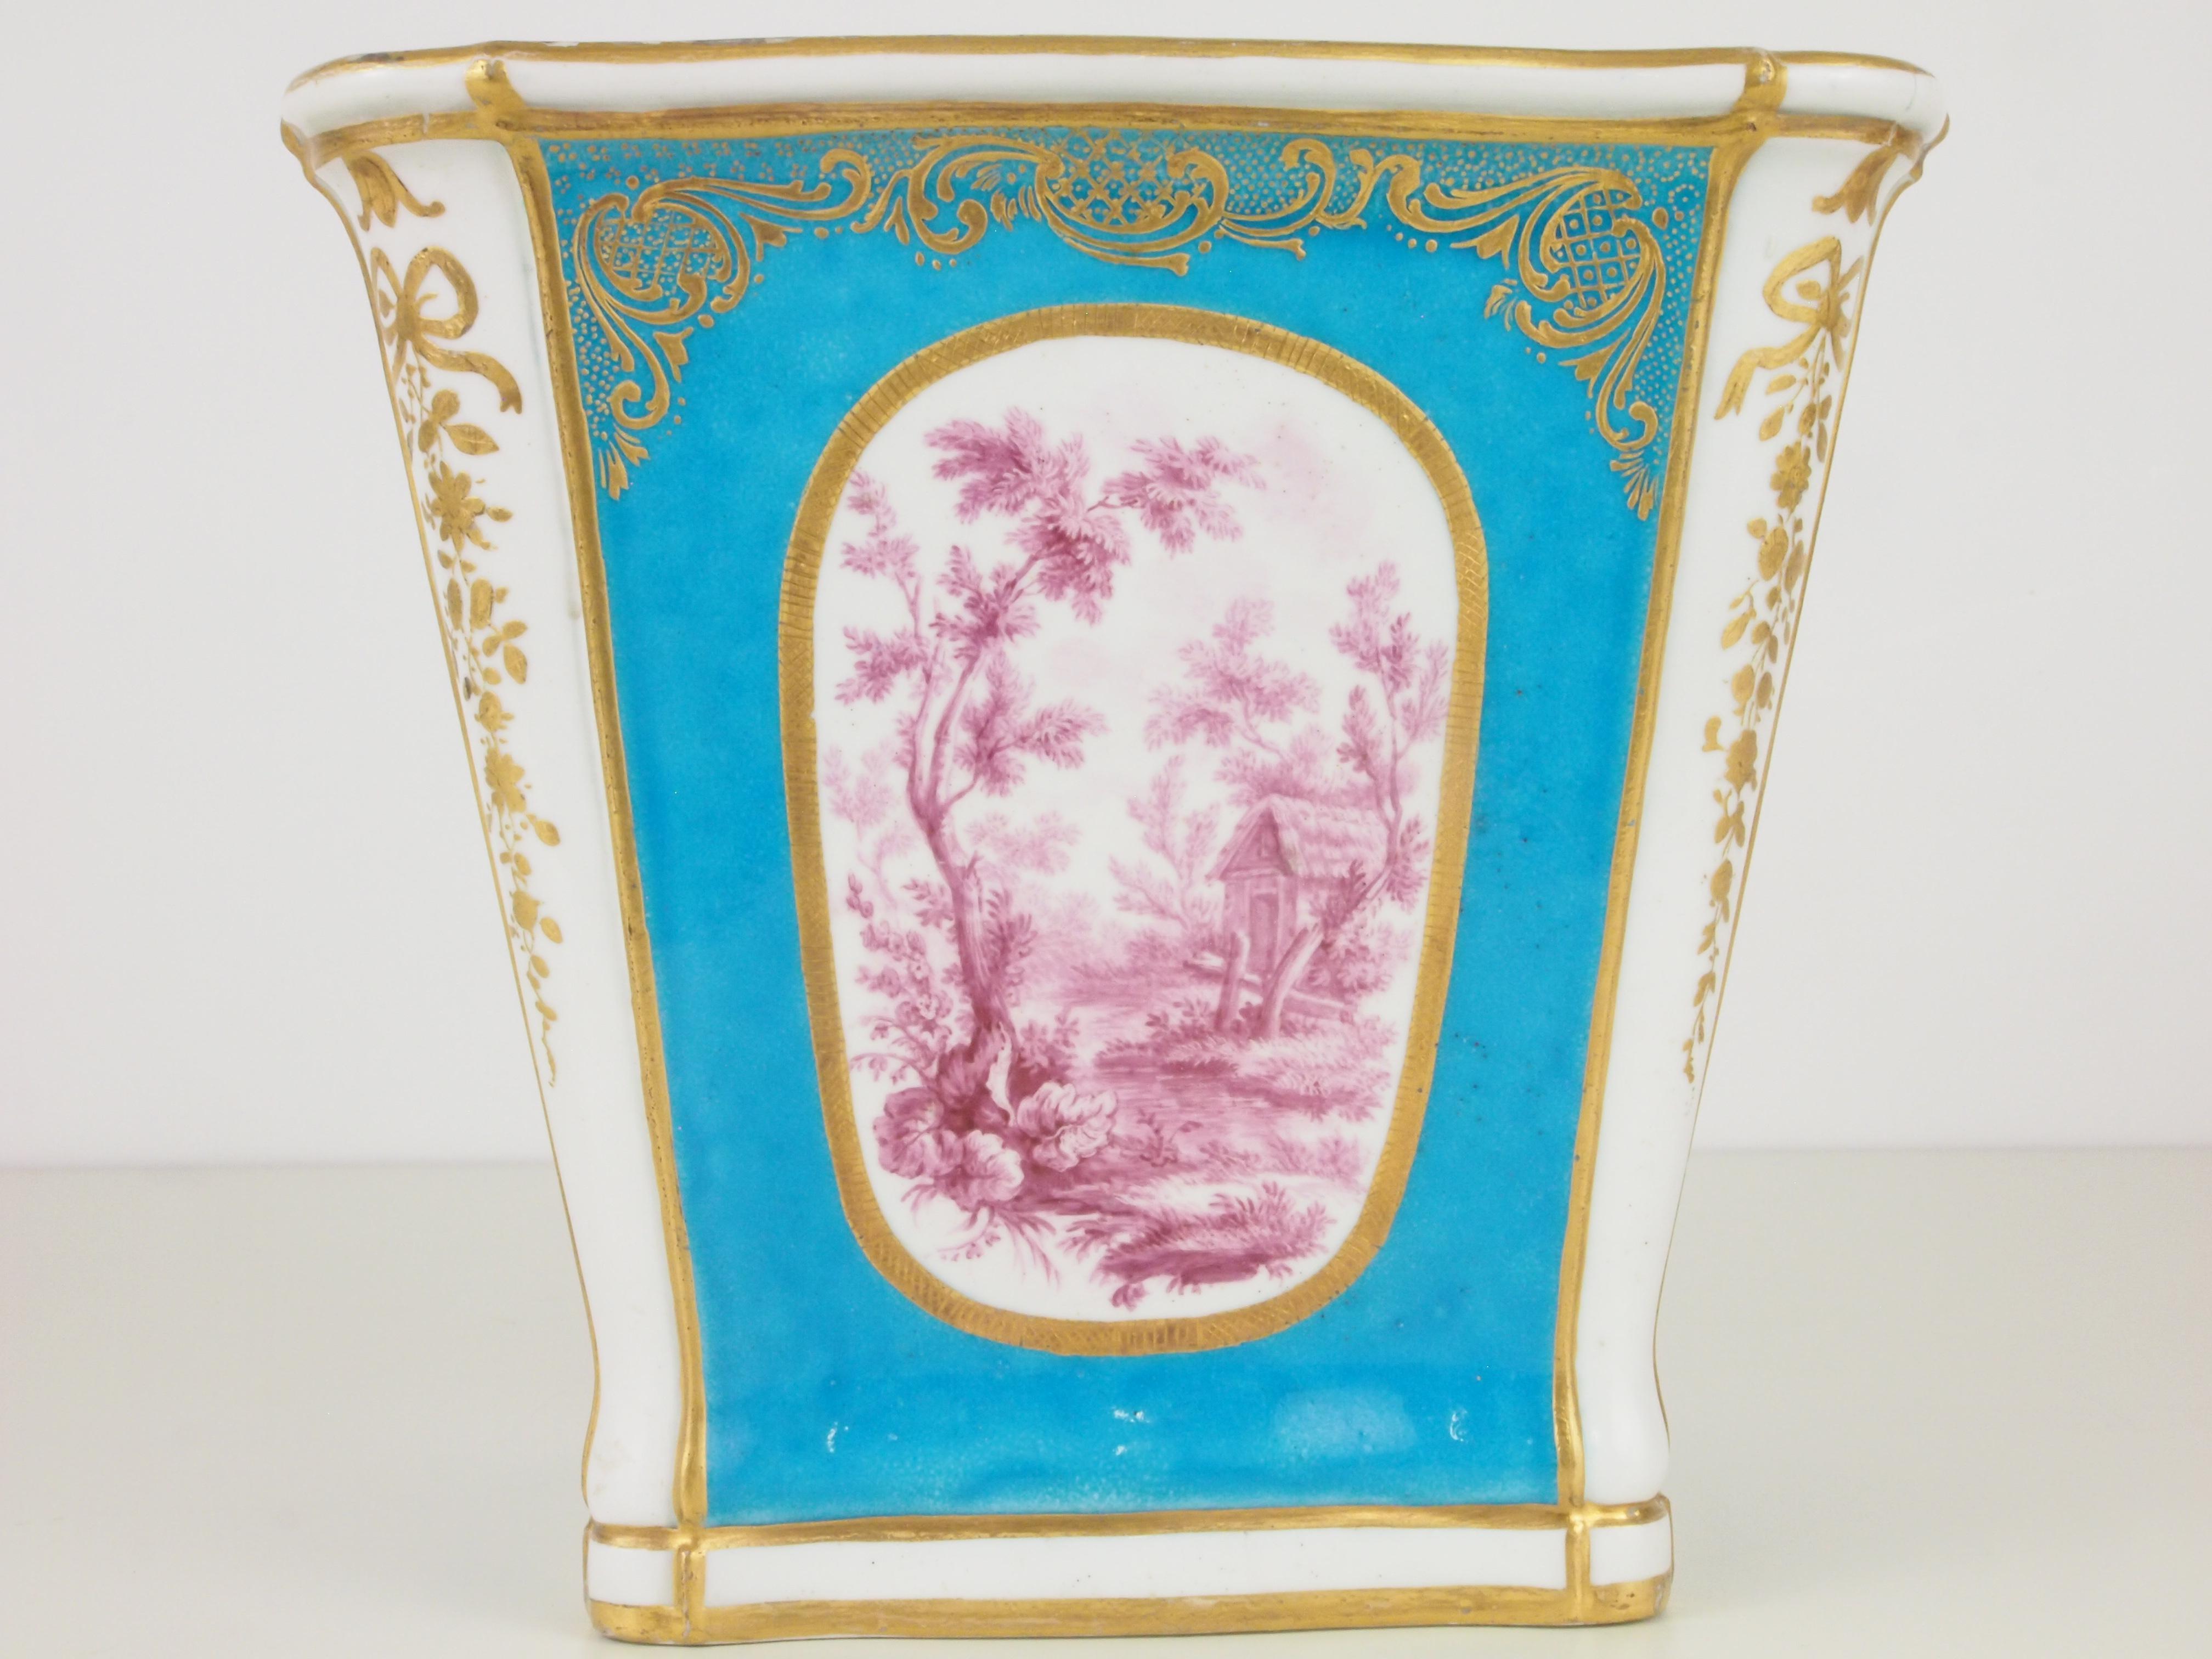 A rare antique porcelain cache pot in rare quadrangular shape from the 18th-19th century with very fine romantic purple images on a stunning celestial blue background with fine hand painted gilded decorations.

This cache pot has underneath the